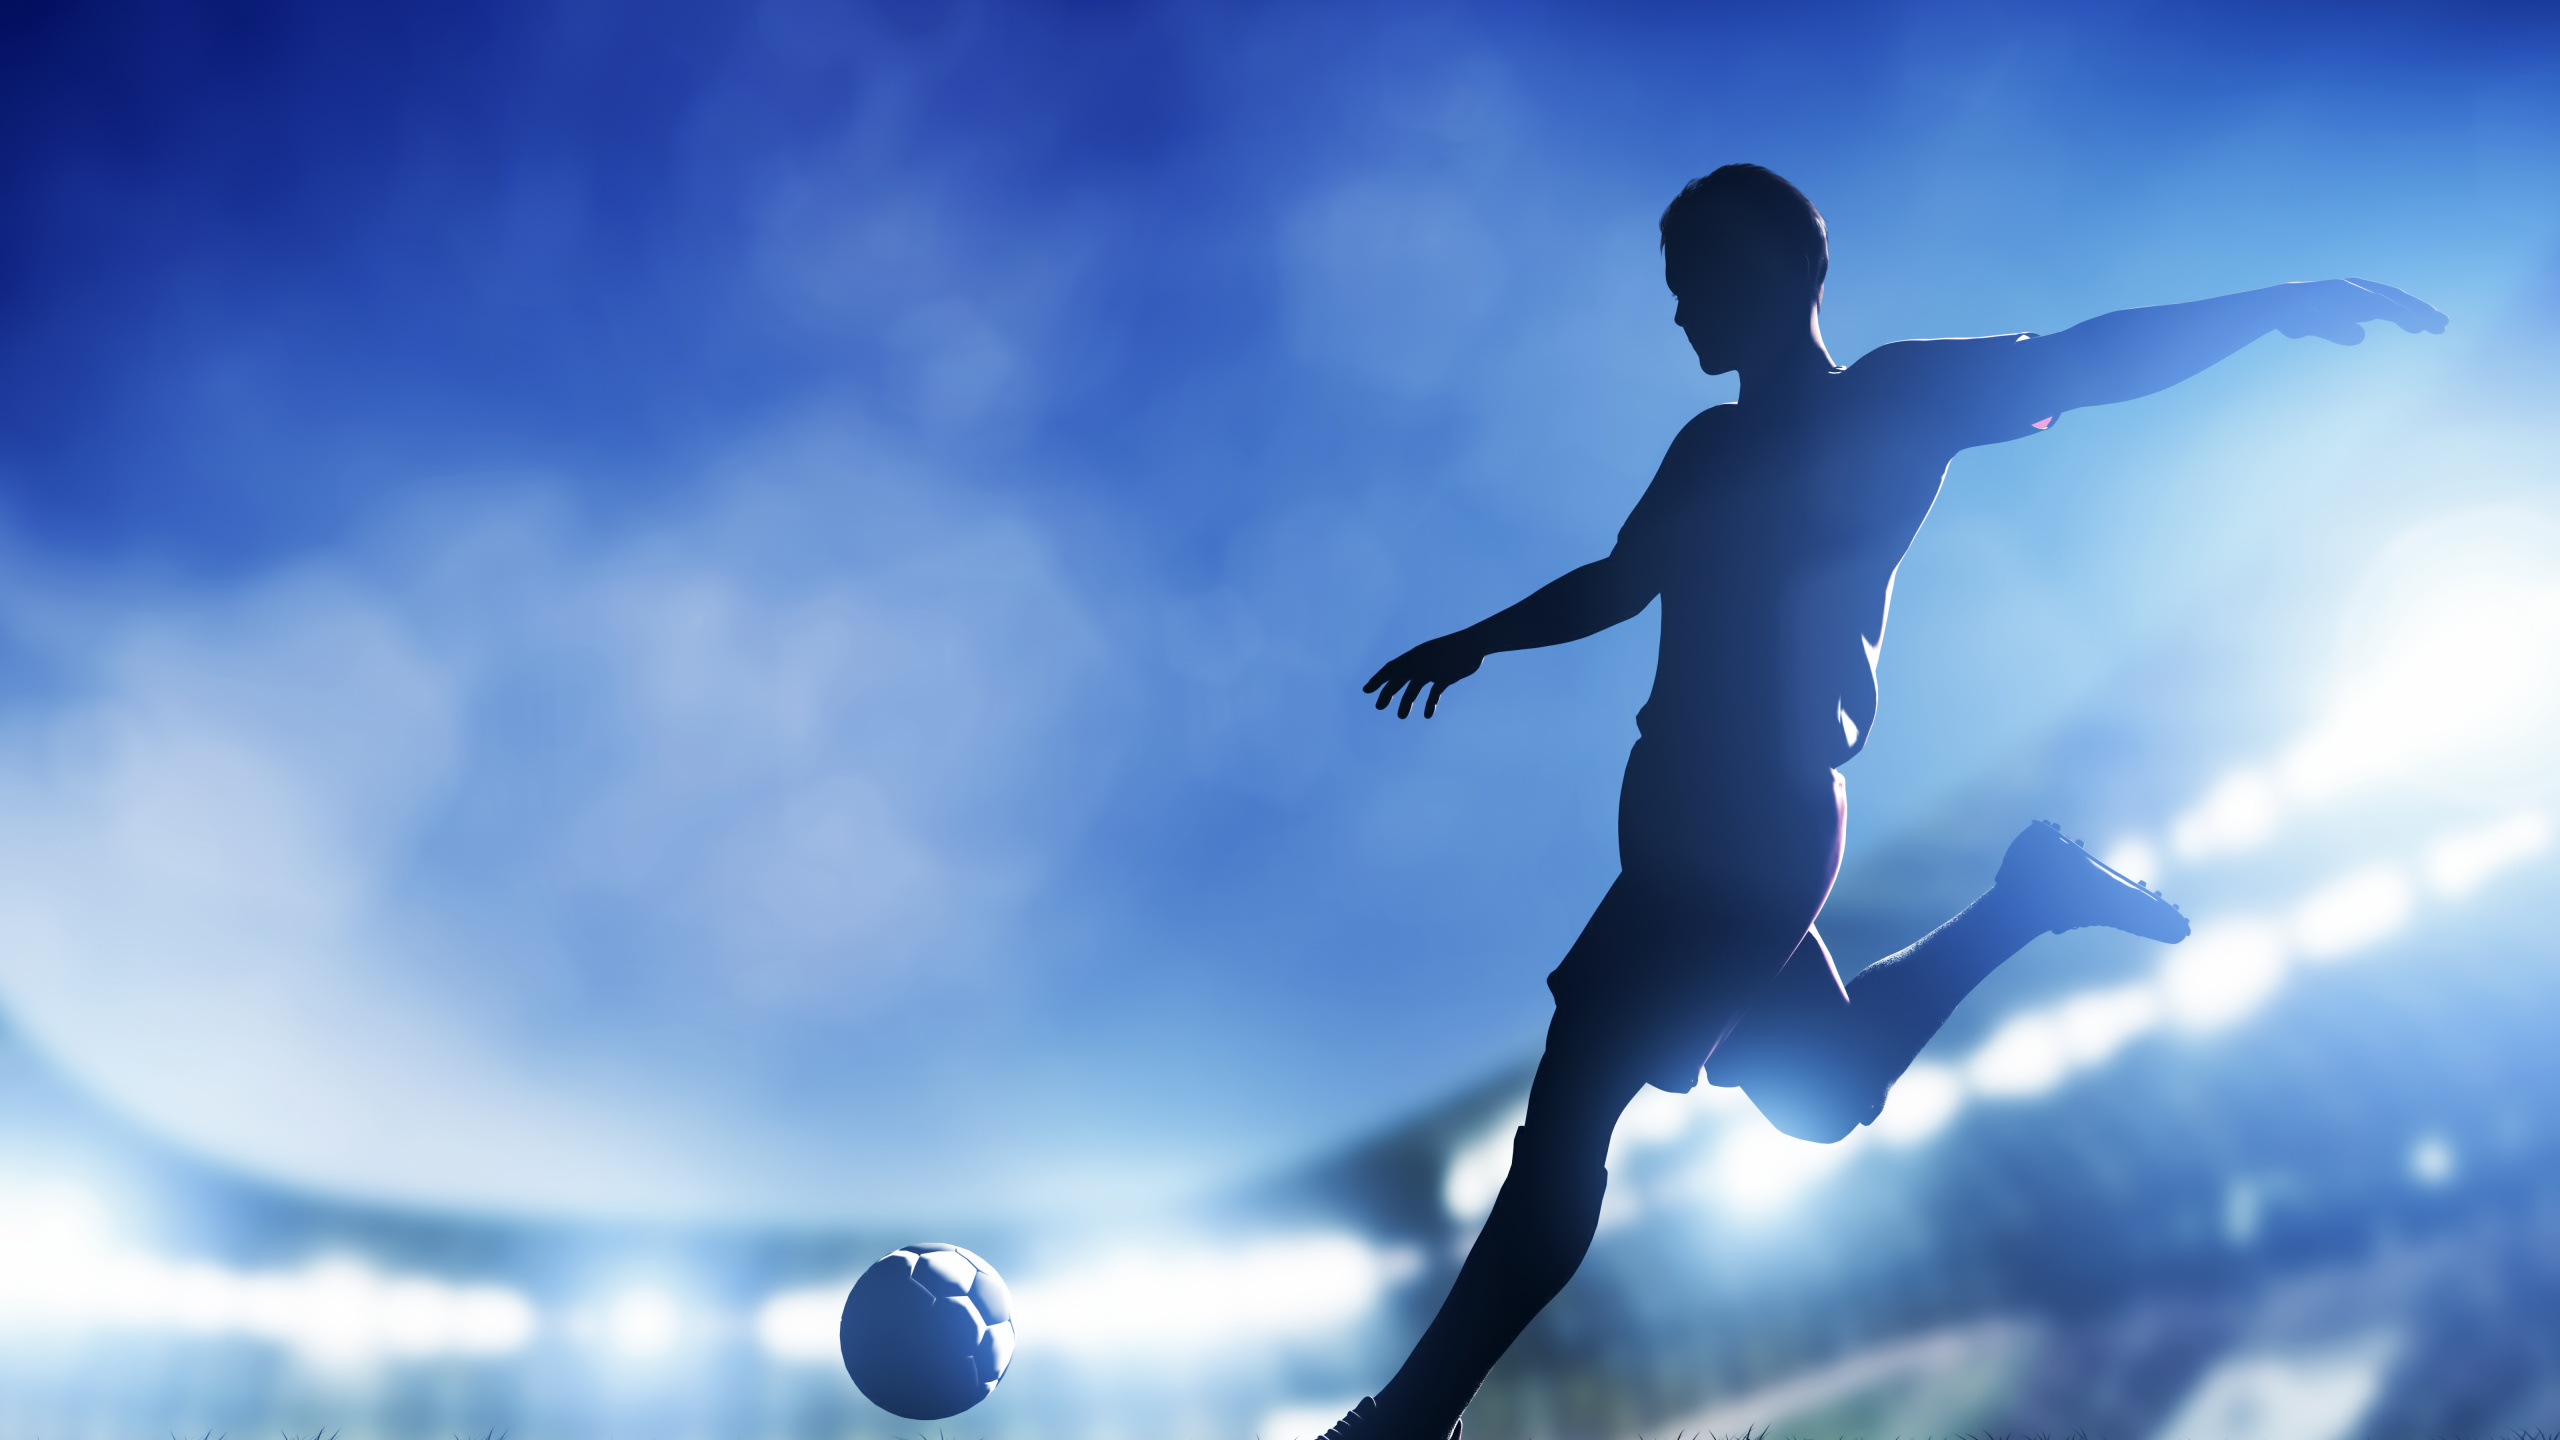 Man in Black Shorts Playing Soccer Ball. Wallpaper in 2560x1440 Resolution